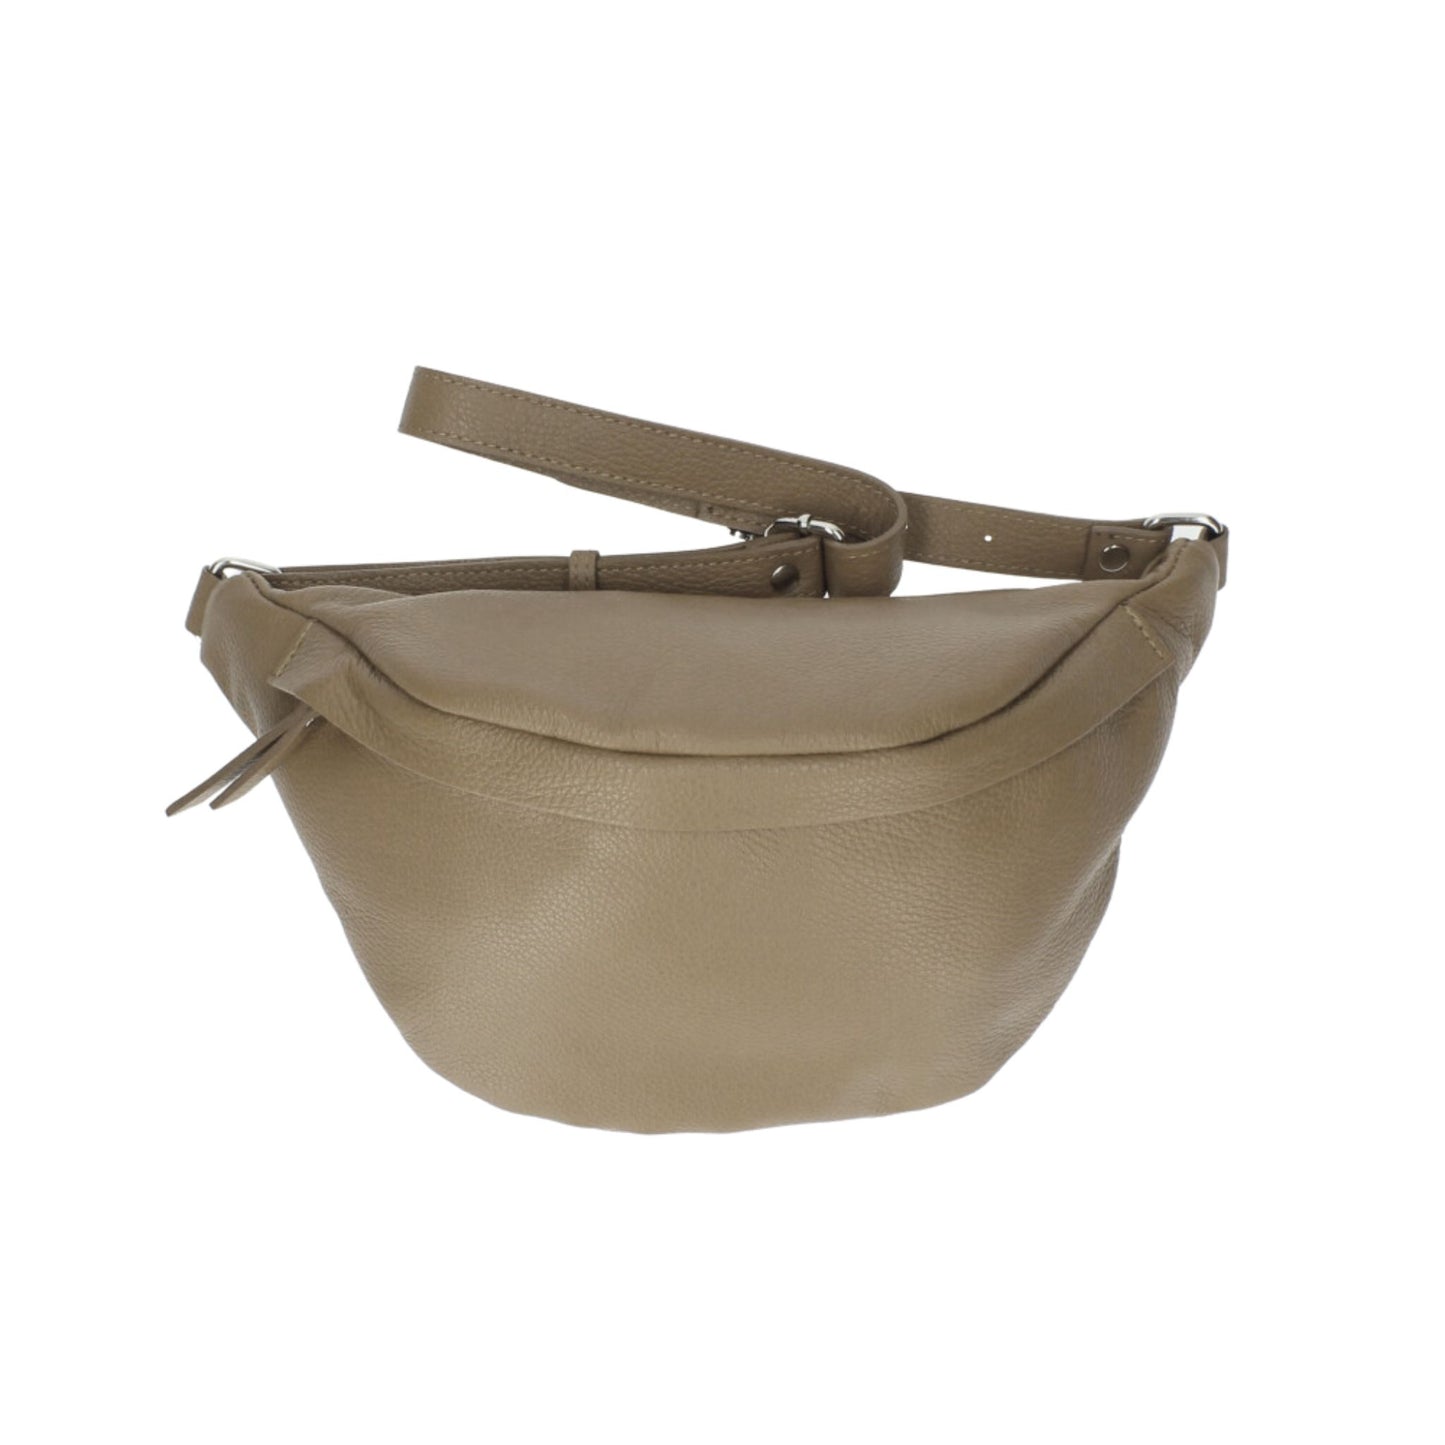 The Large Leather Bumbag / Sling Bag